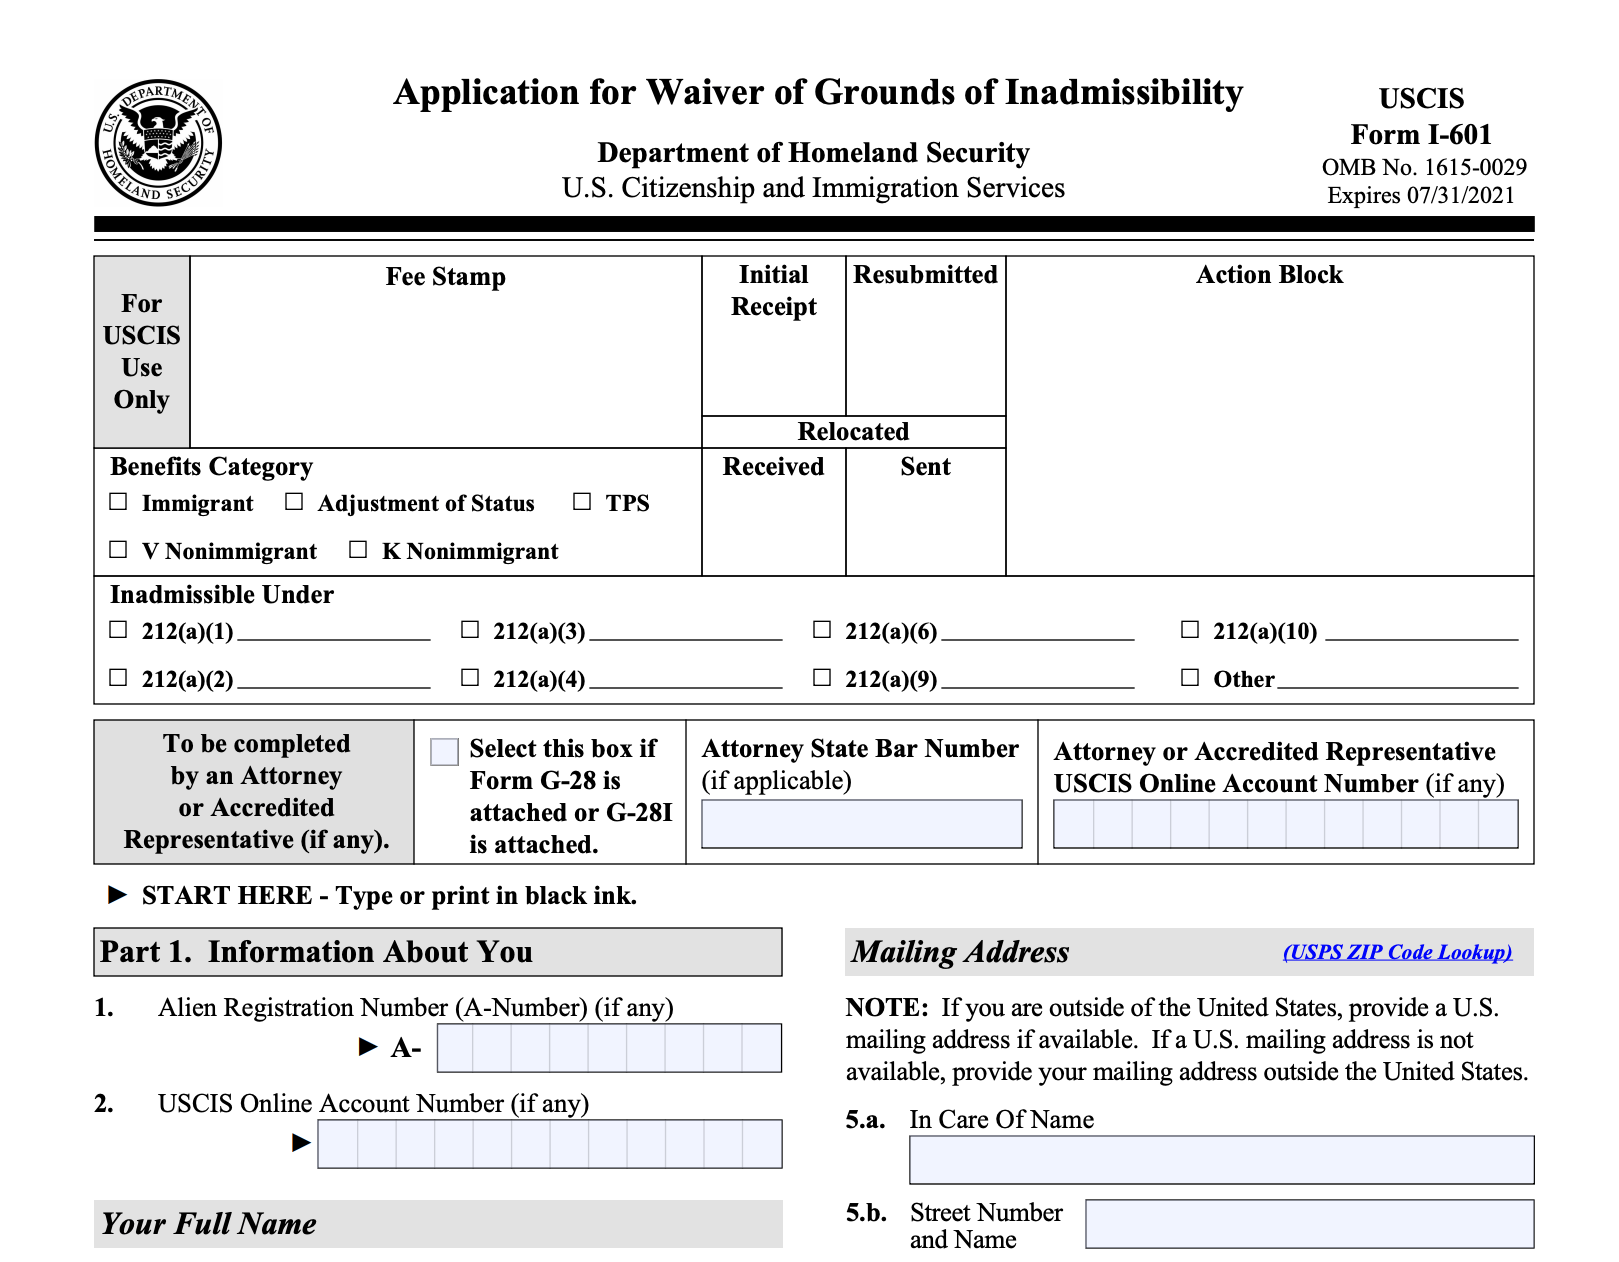 Forms I-601, I-601A - Applying For a Waiver of Inadmissibility